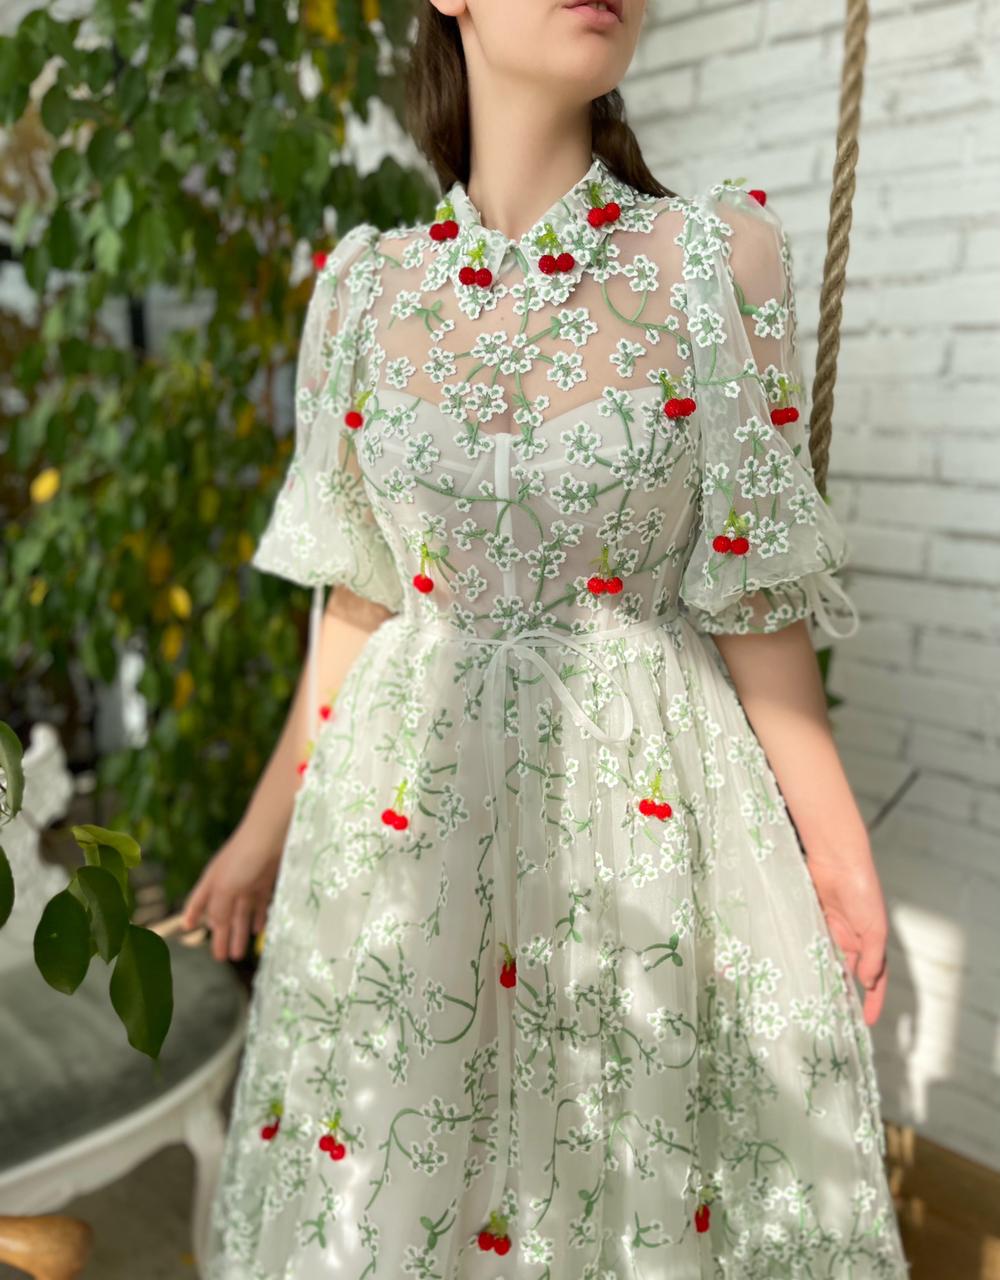 White and green midi dress with short sleeves, daisies and cherries